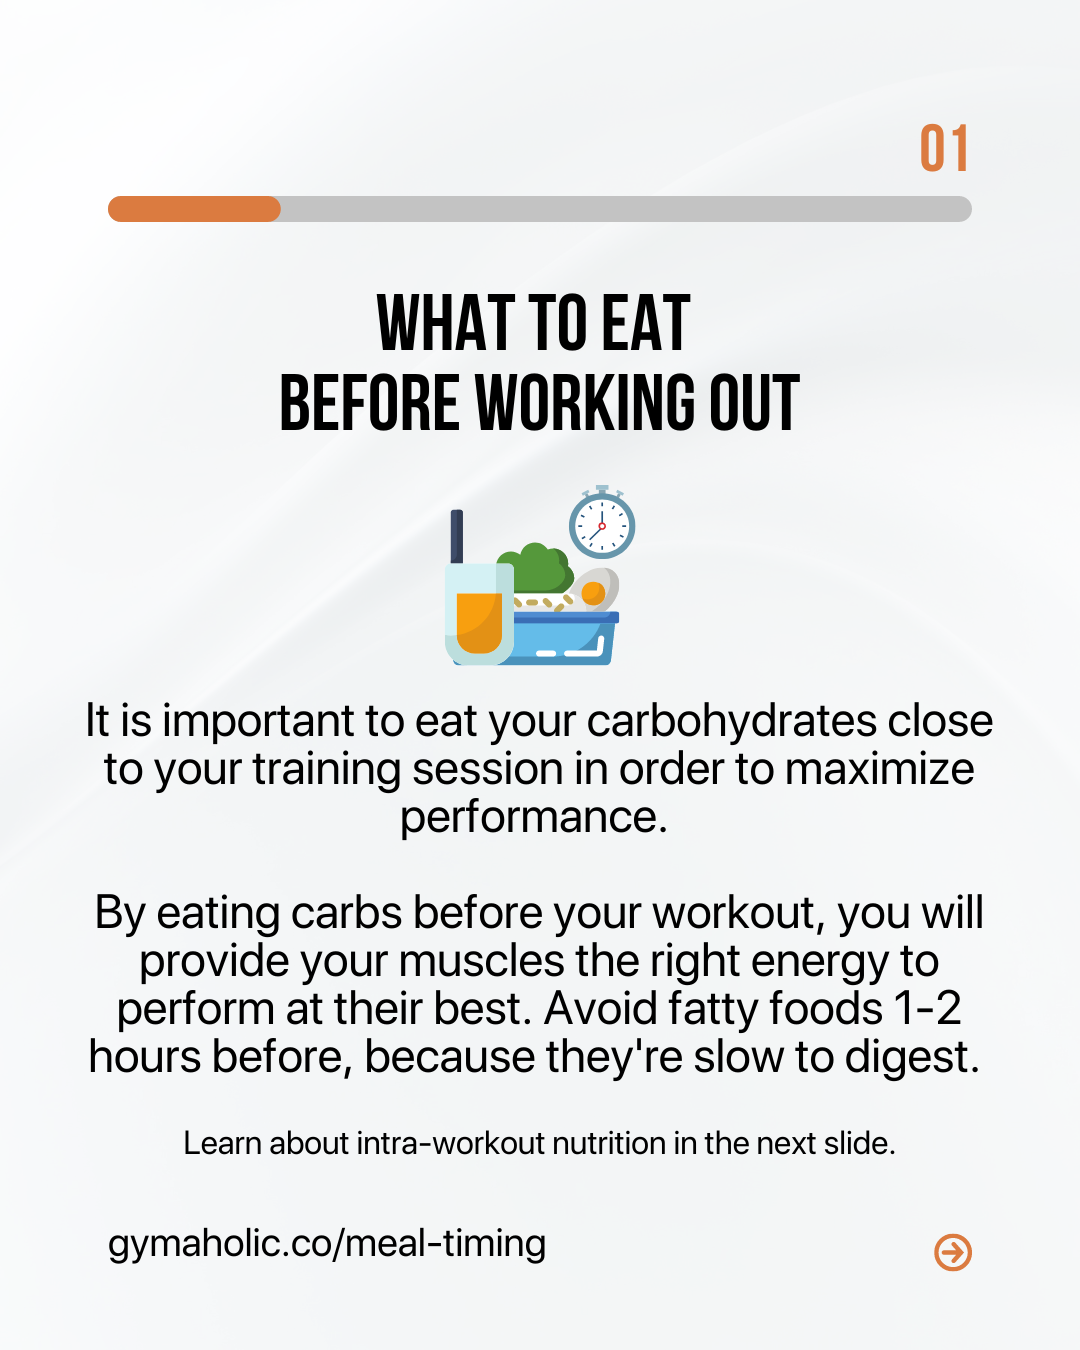 Does meal timing affect your fitness results?